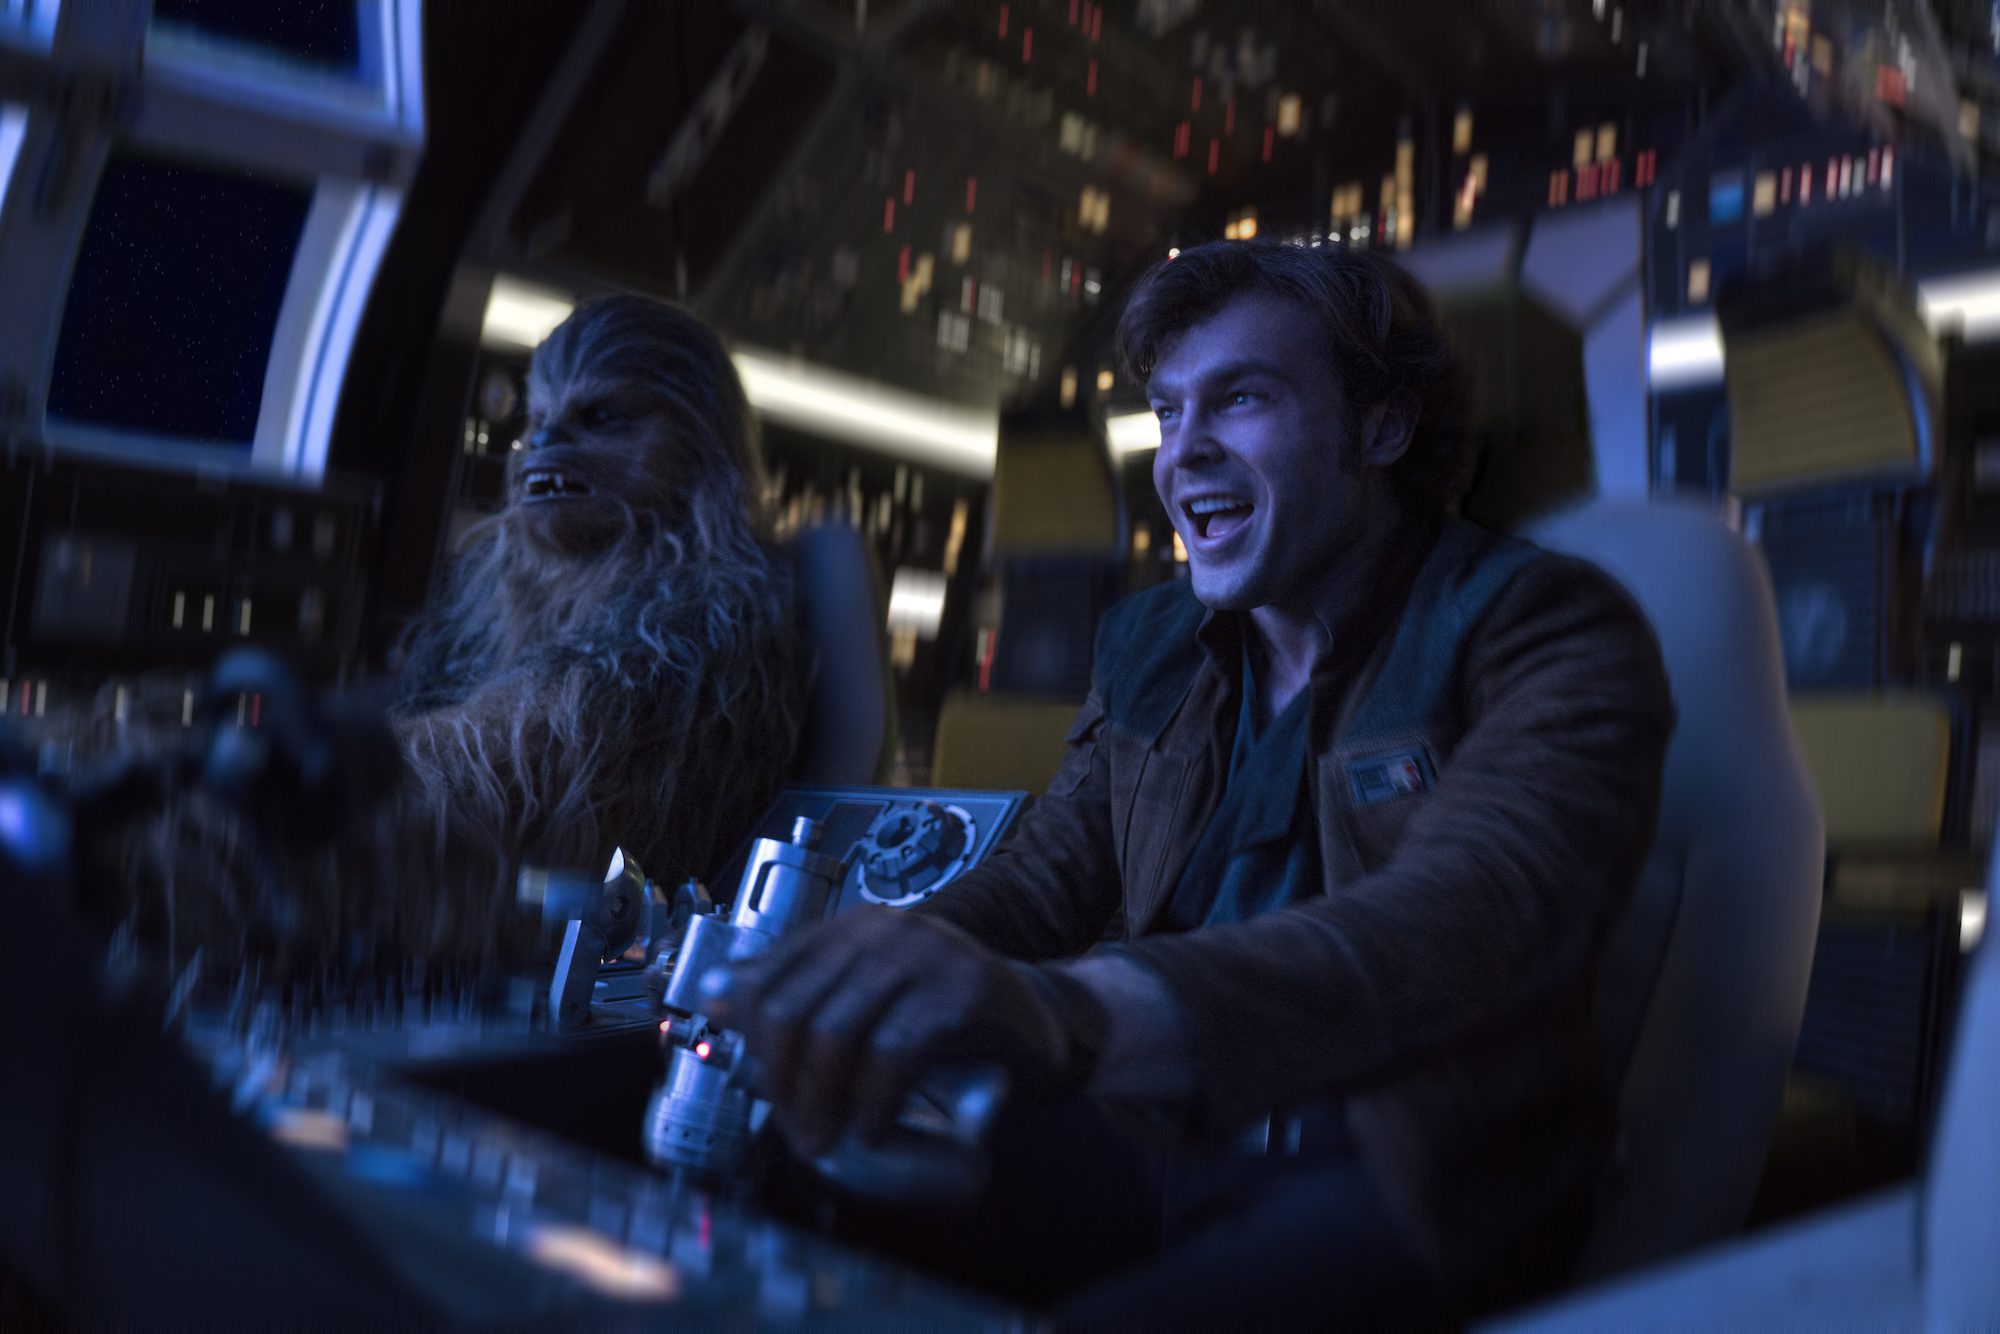 Alden Ehrenreich is Han Solo and Joonas Suotamo is Chewbacca in SOLO: A STAR WARS STORY. (Walt Disney Pictures)